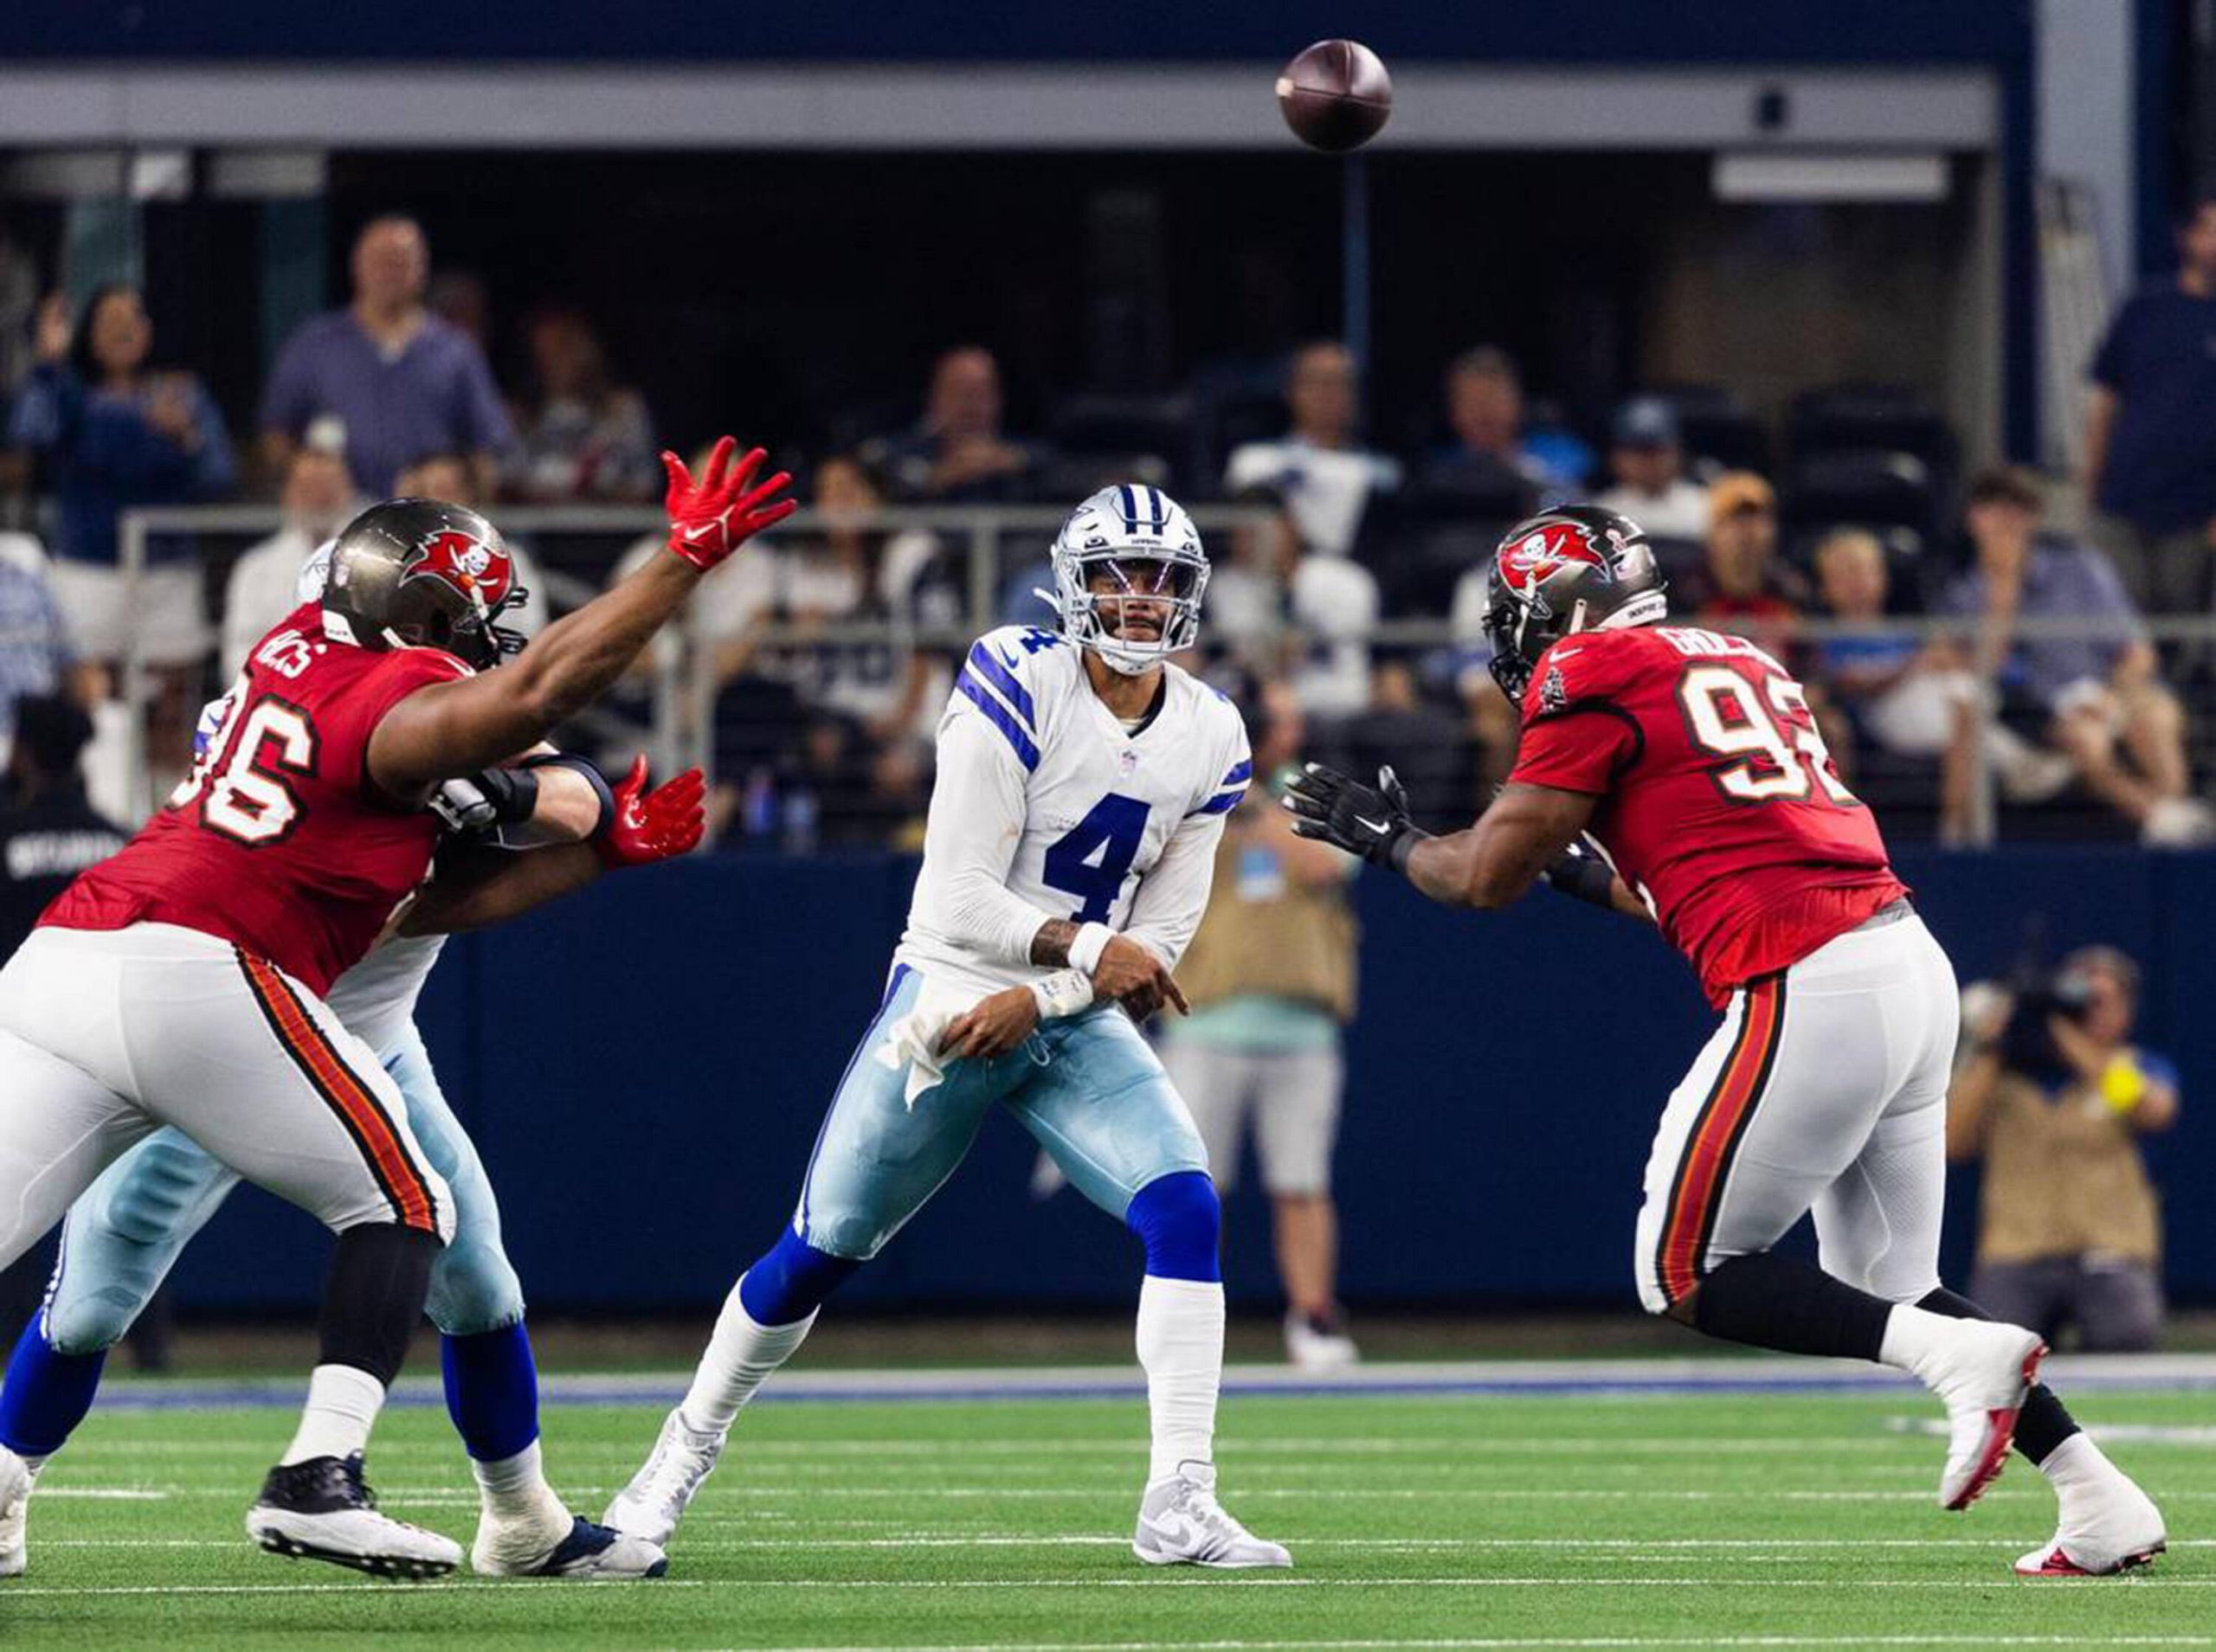 September 12, 2022: Dallas Cowboys quarterback Dak Prescott throws the ball during the first half against the Tampa Bay Buccaneers on Sunday, Sept. 11, 2022, at AT&T Stadium in Arlington, Texas. Prescott injured his right hand late in the fourth quarter and left the game. - ZUMAm67_ 20220912_zaf_m67_004 Copyright: xYffyxYossiforx